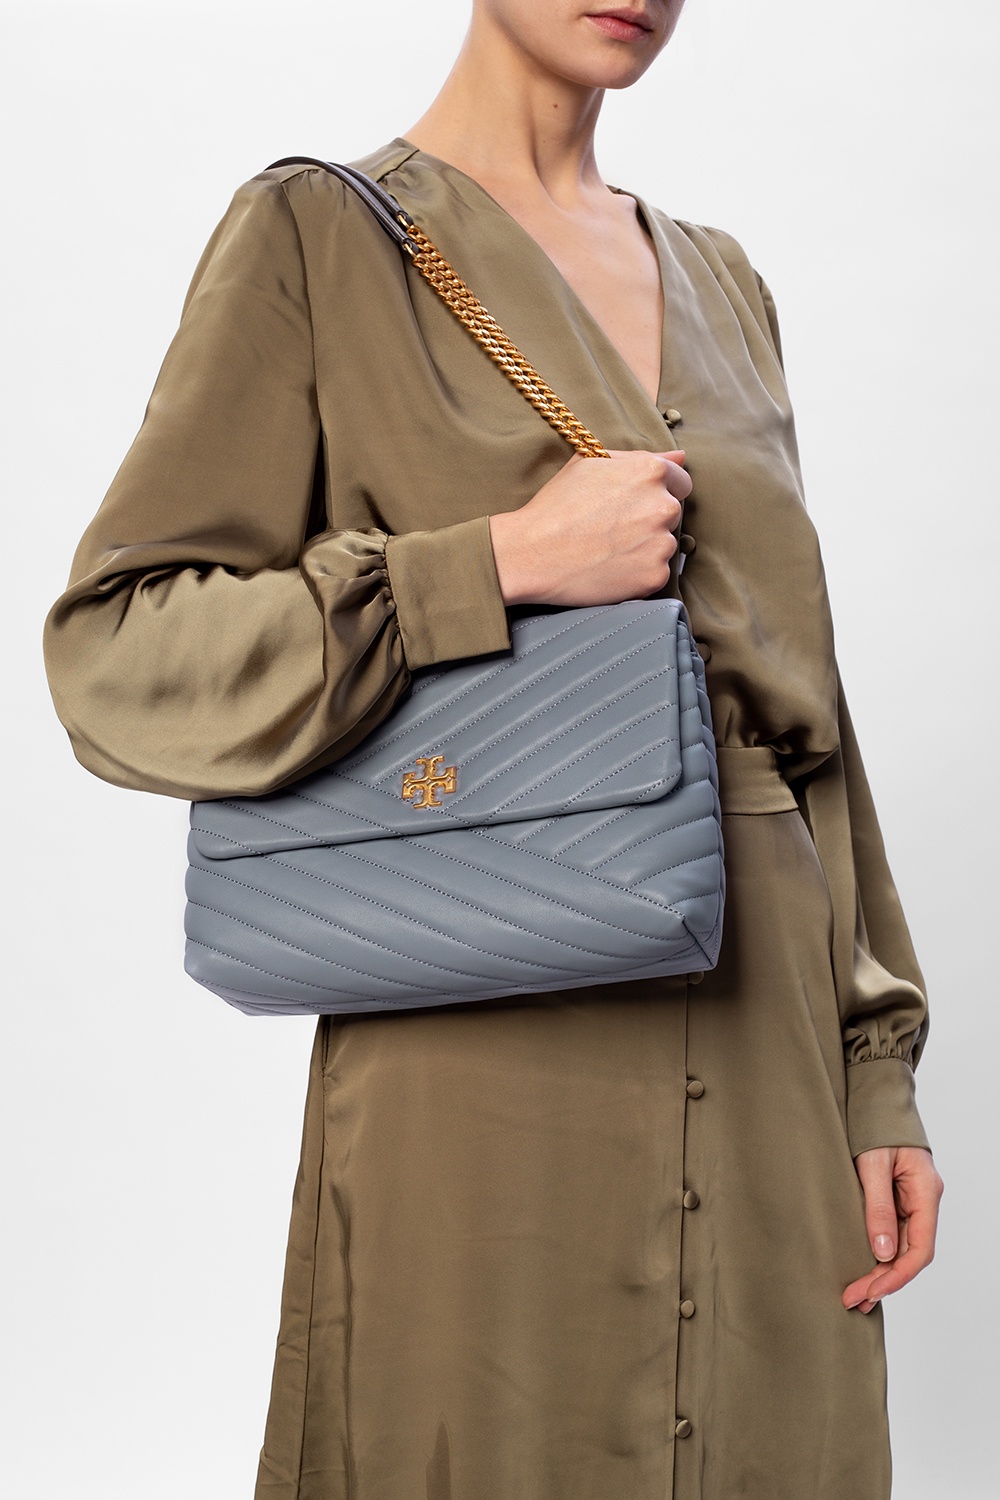 Tory Burch Outlet: Kira bag in quilted leather - Sky Blue